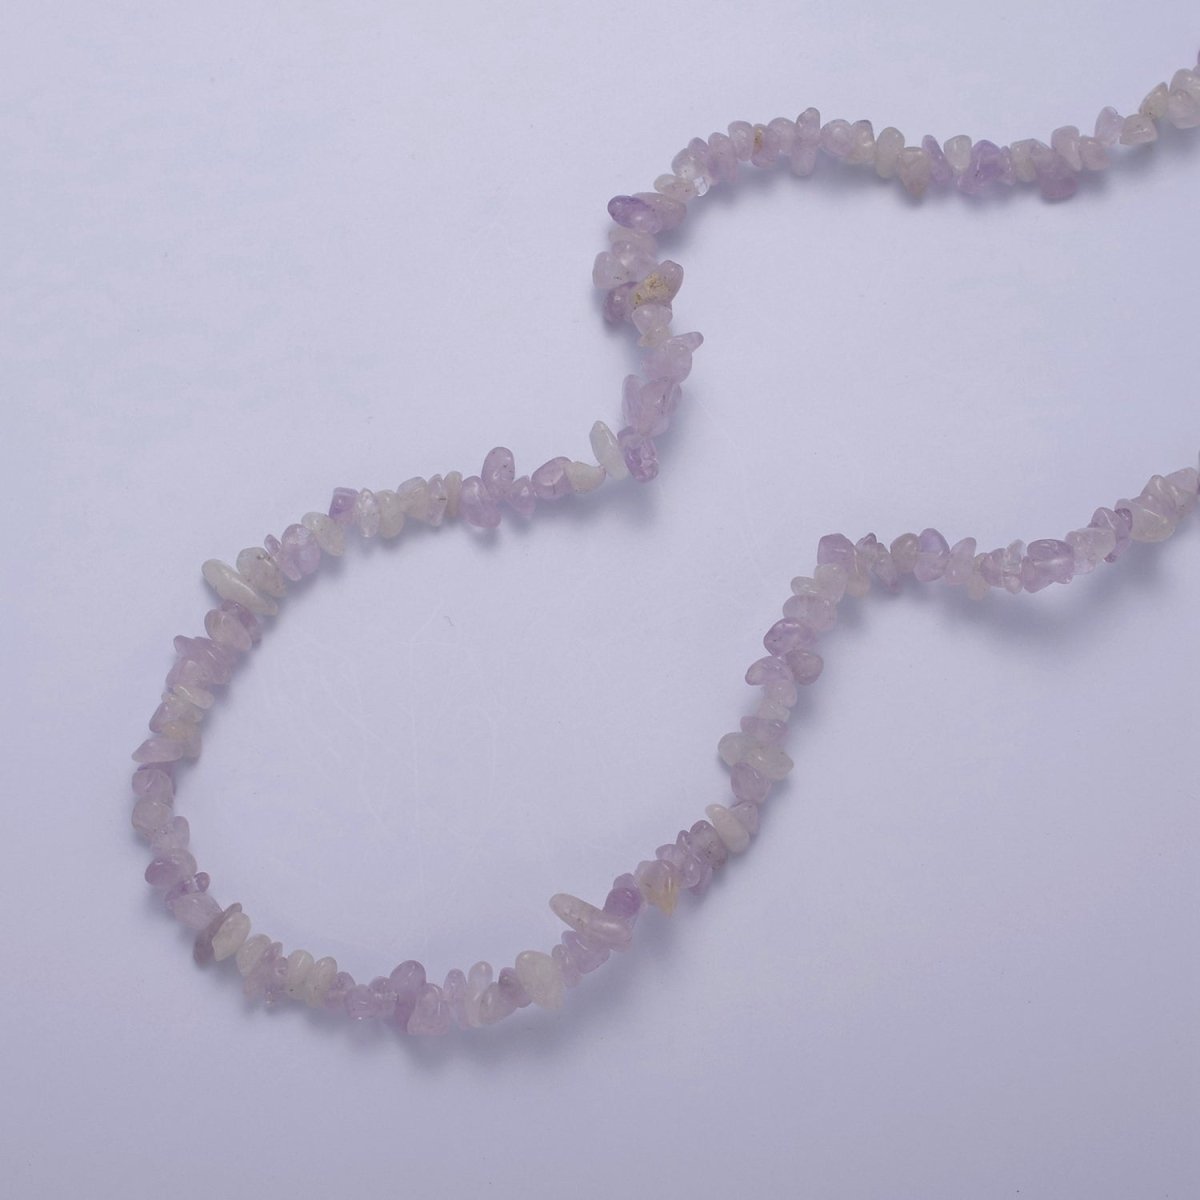 16.5 Inch Natural Purple Ametrine Quartz Crystal Stone Bead Necklace with 2" Extender | WA-636 Clearance Pricing - DLUXCA